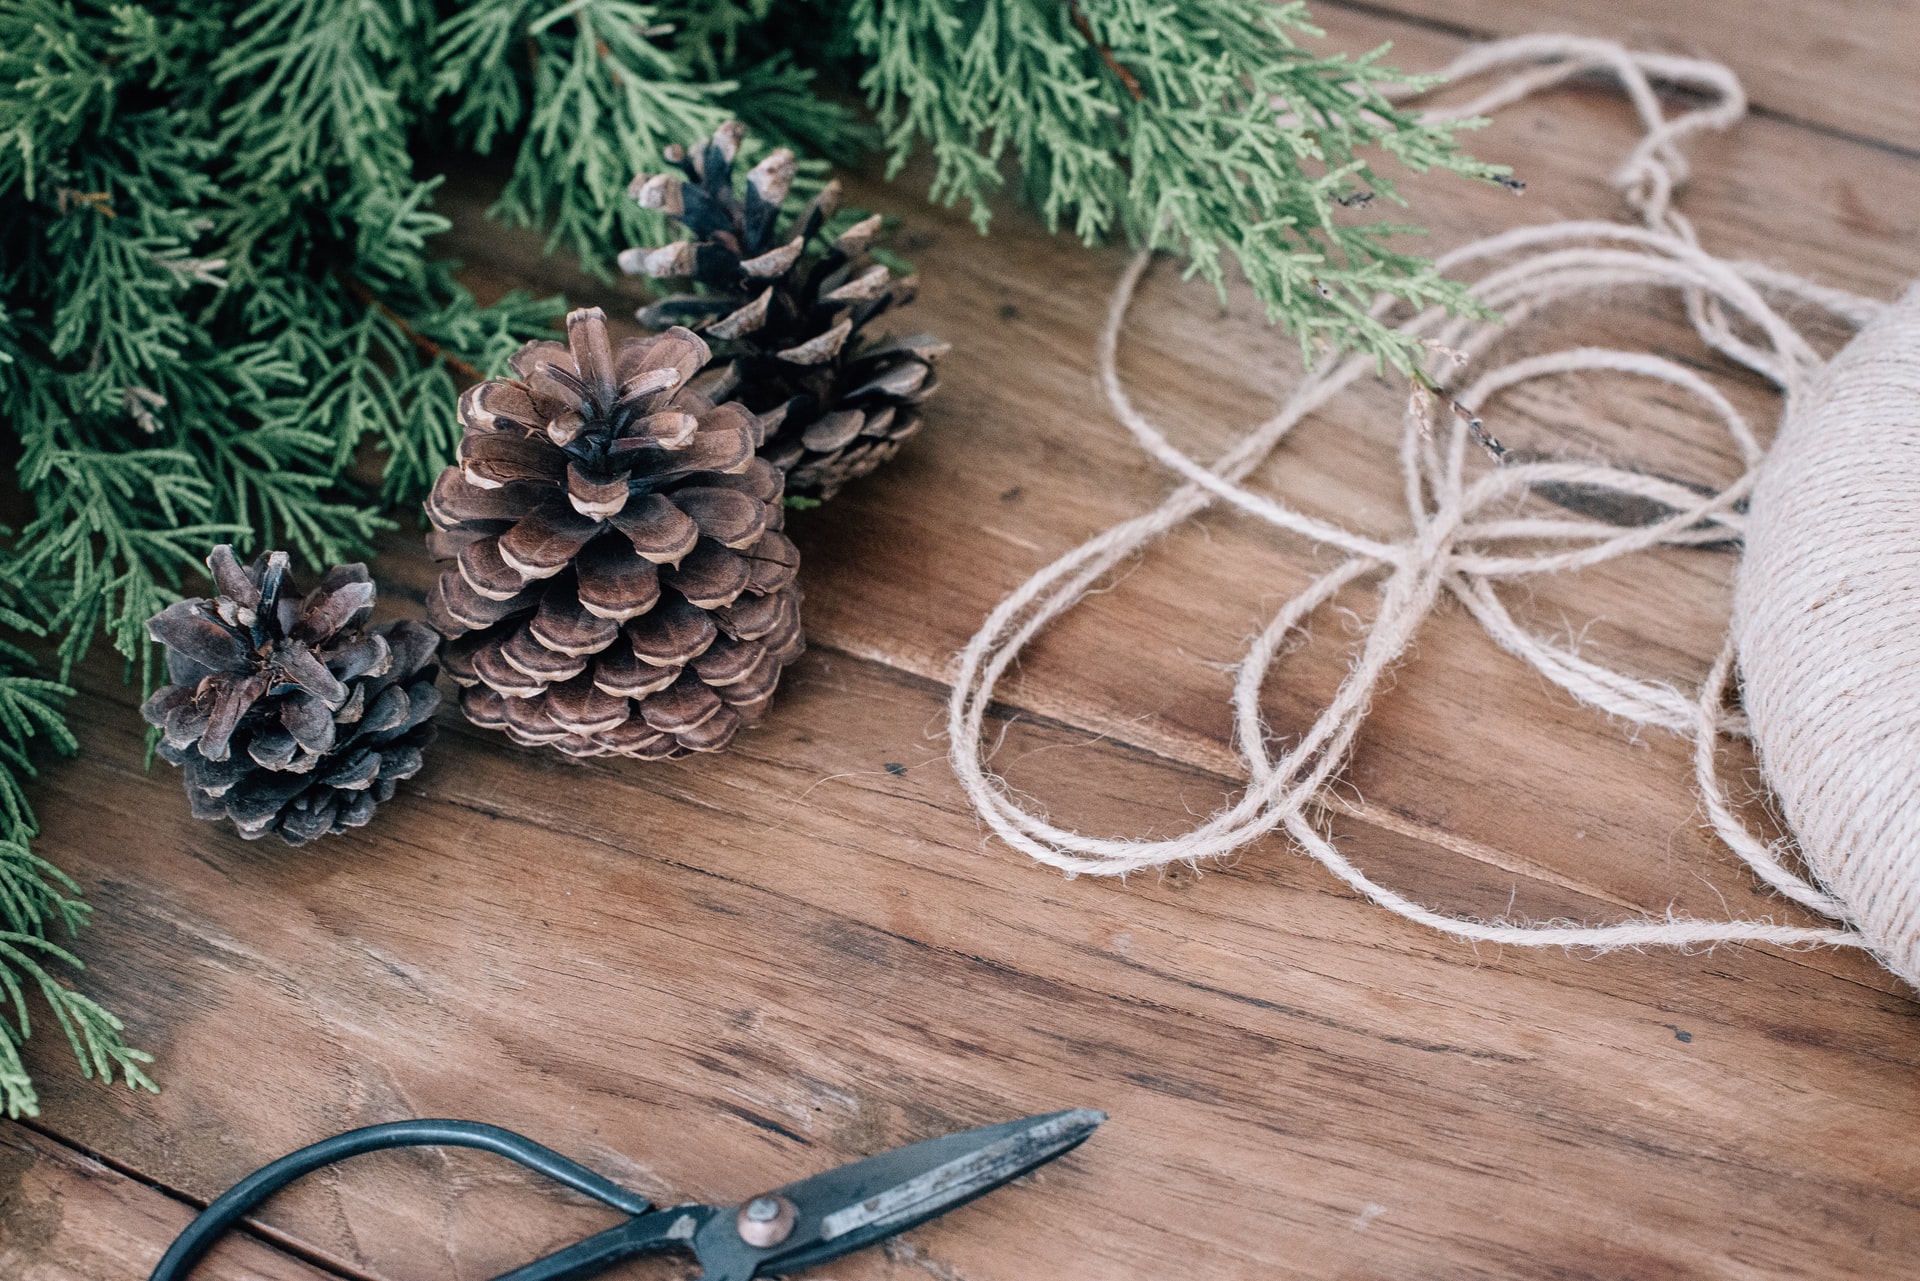 pine cones and evergreen branches next to a ball of twine and scissors on a wooden table